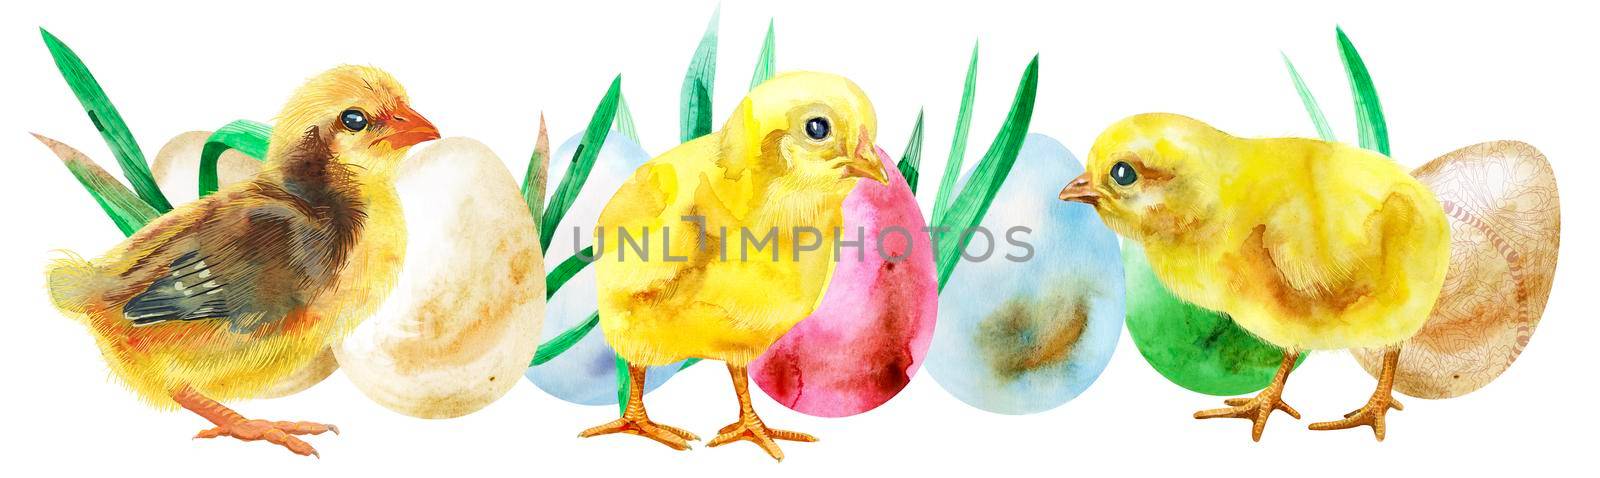 Watercolor Easter colored eggs, chickens and grass by NataOmsk